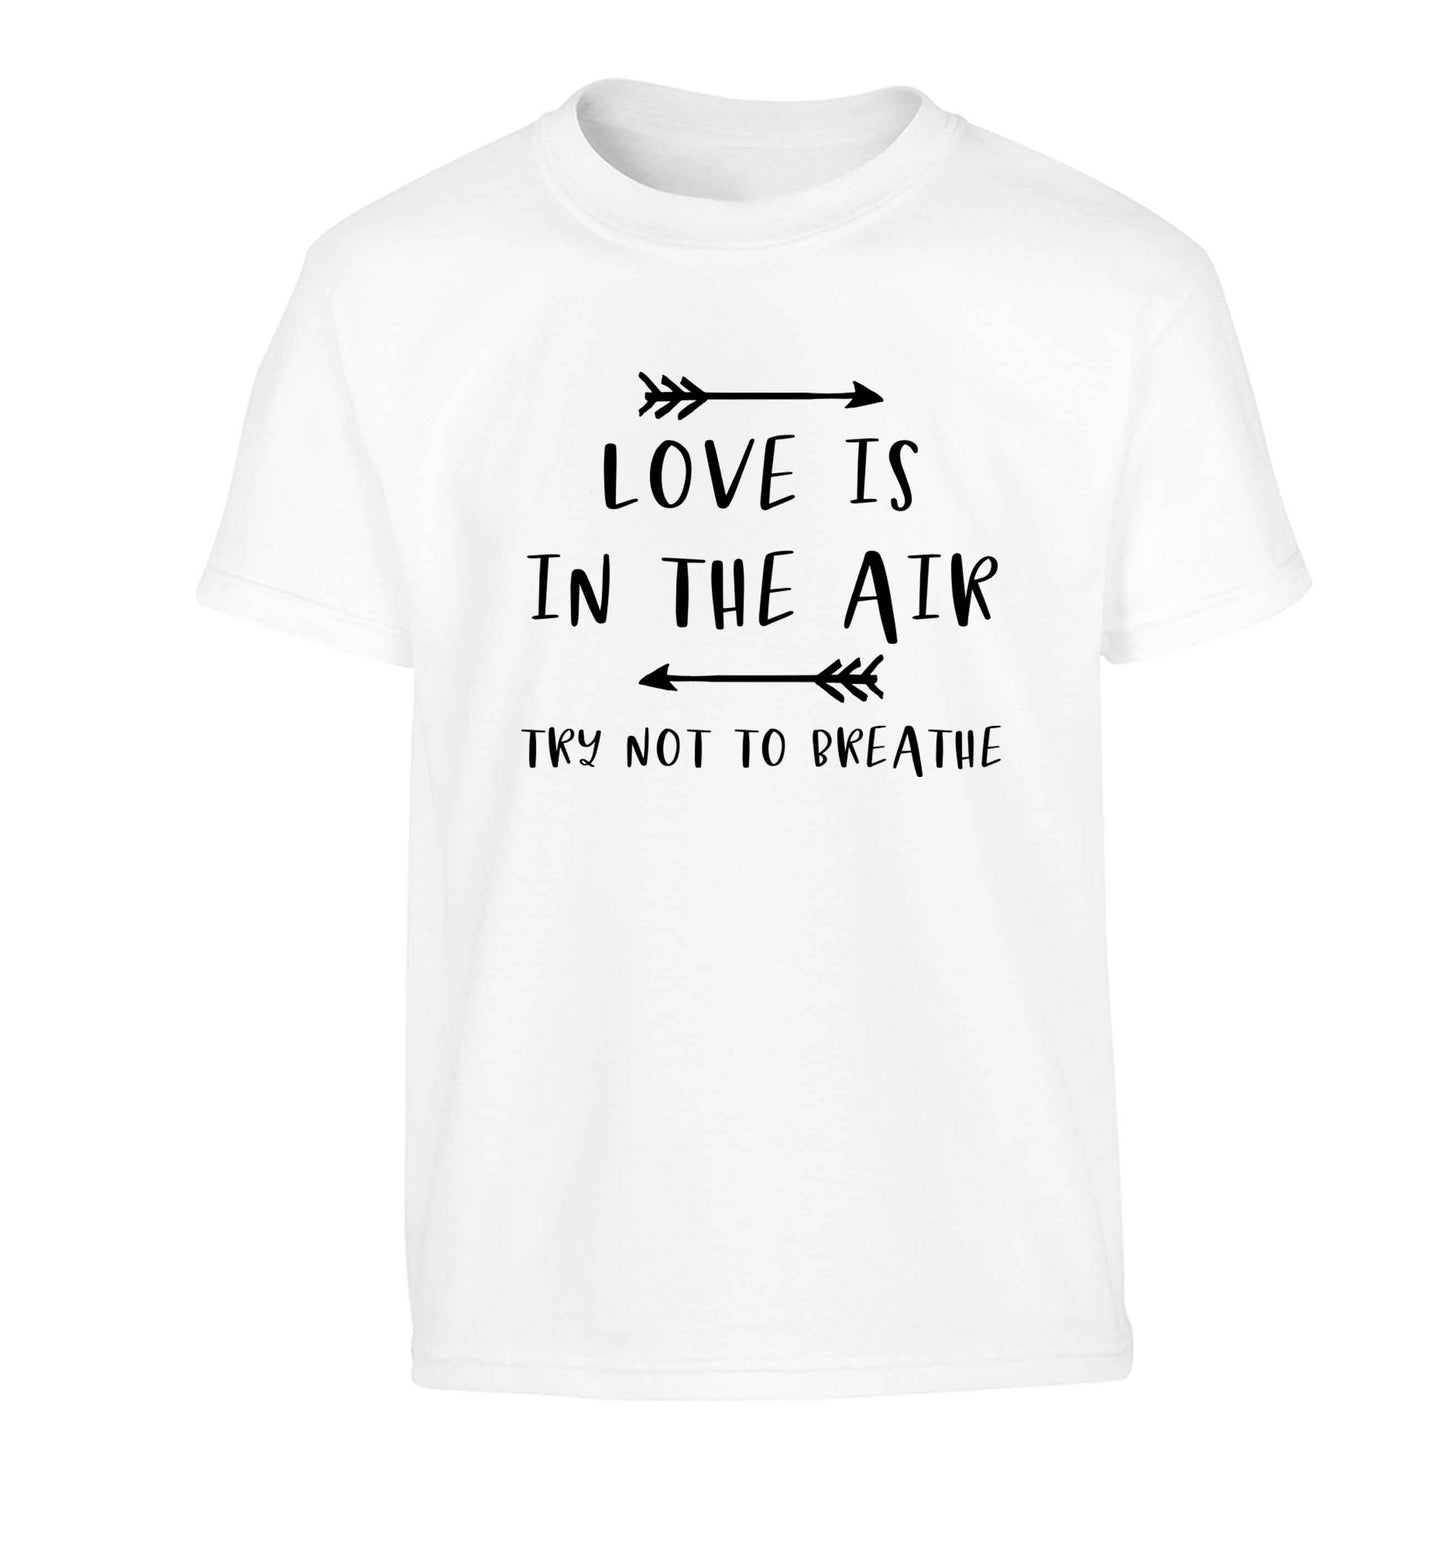 Love is in the air try not to breathe Children's white Tshirt 12-13 Years